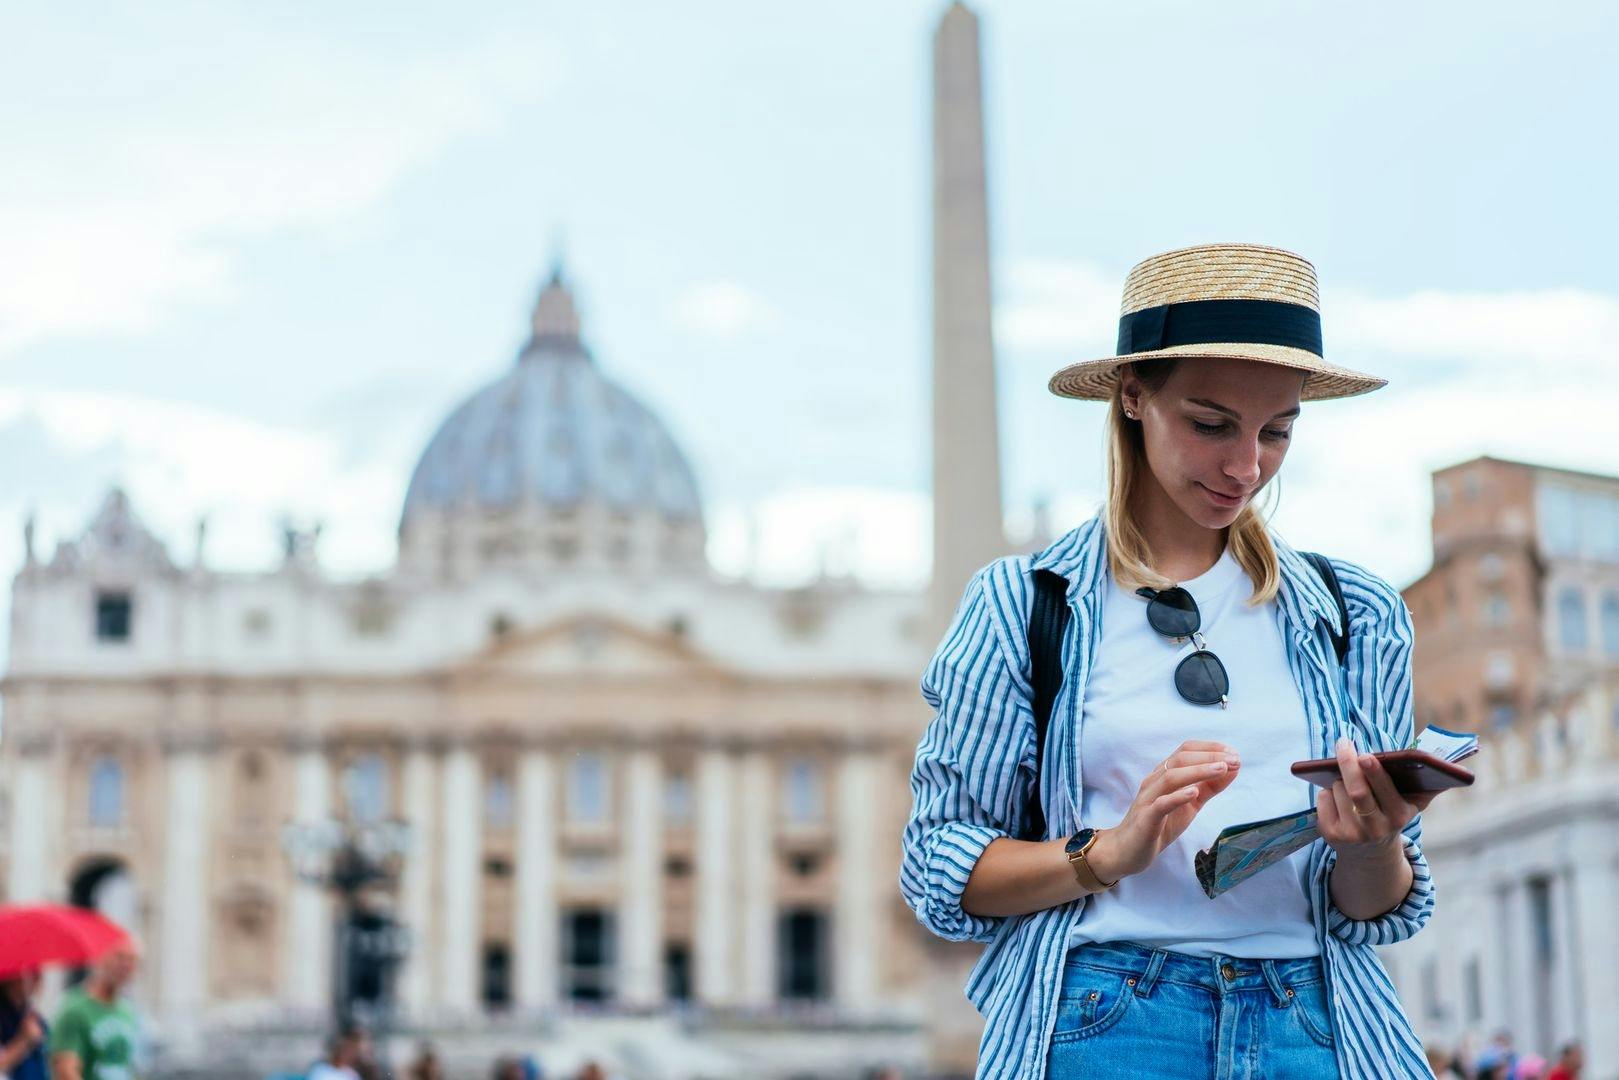 Vatican Museums and St. Peter's Basilica Ticket with Audio Tour Musement